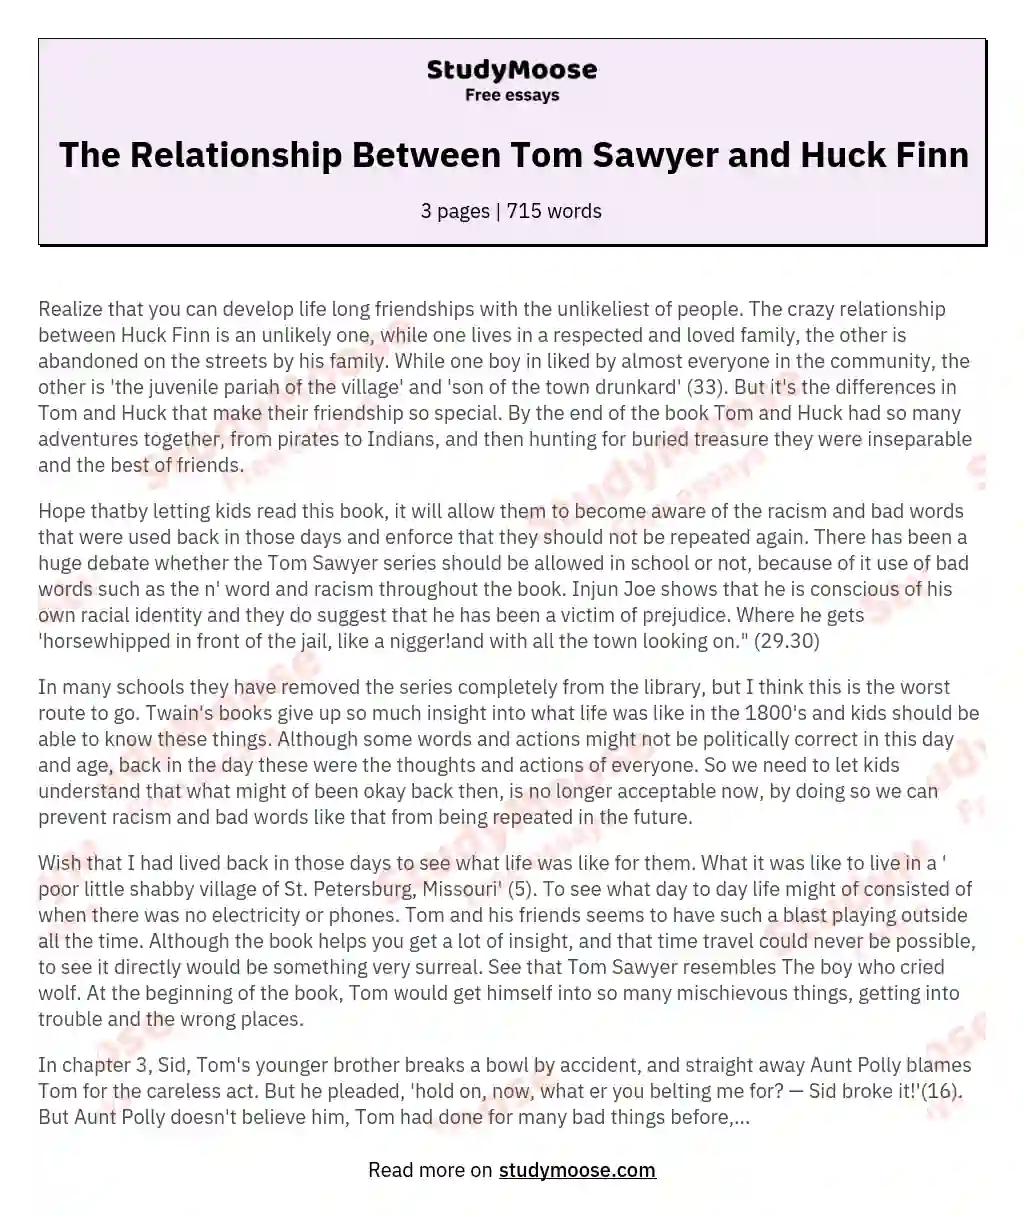 The Relationship Between Tom Sawyer and Huck Finn